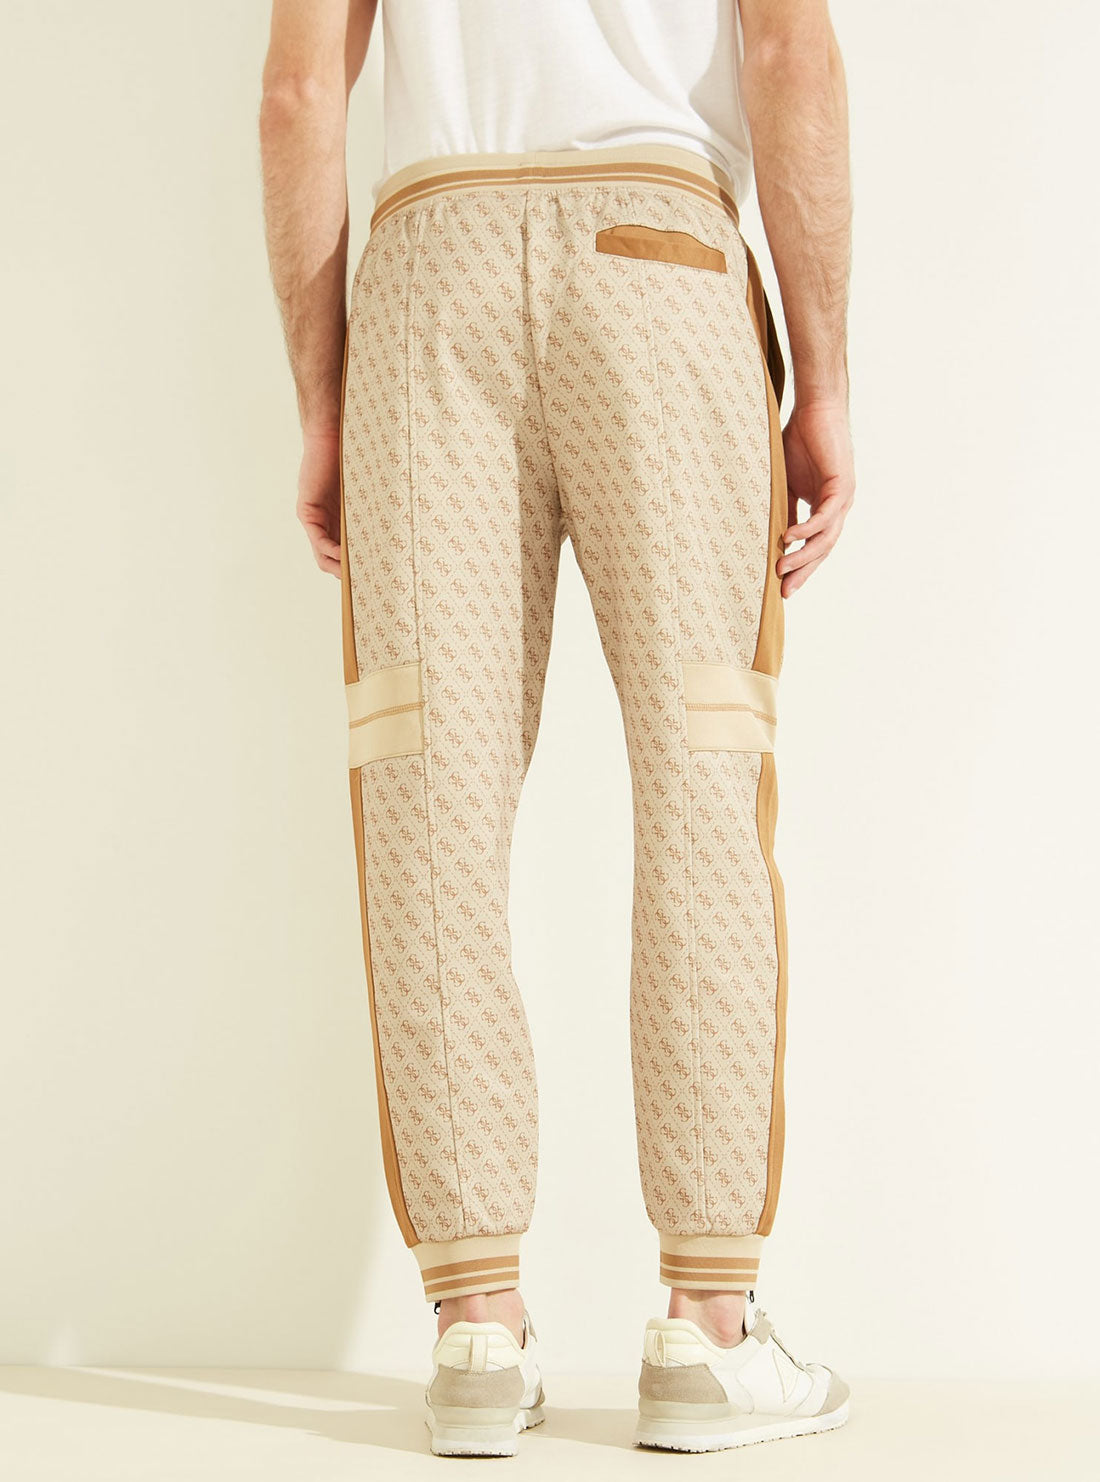 Guess, Marshall Jogging Pants, Beige Blanco